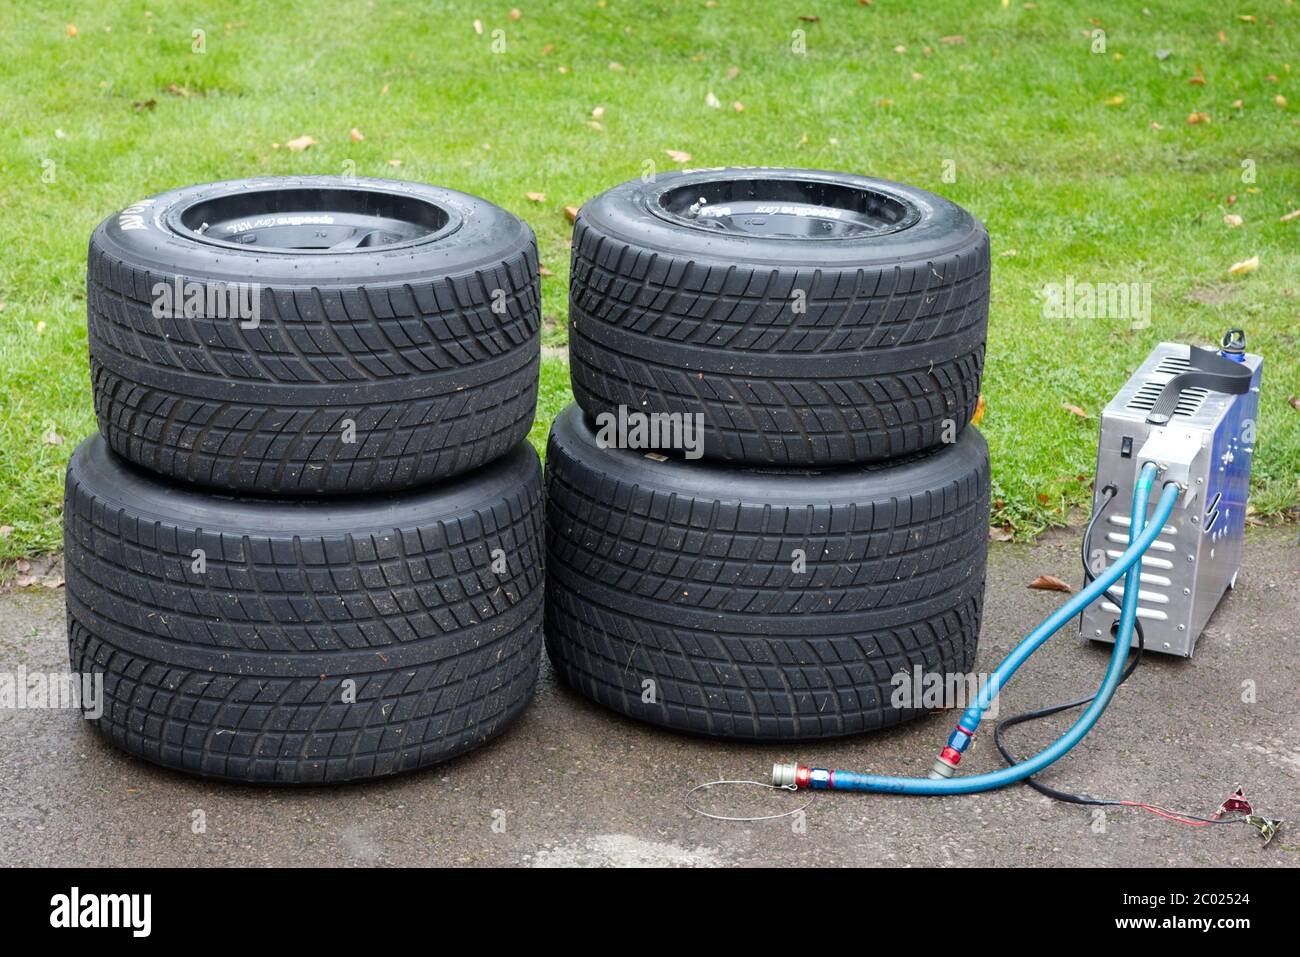 Racing tires and a portable air pump Stock Photo